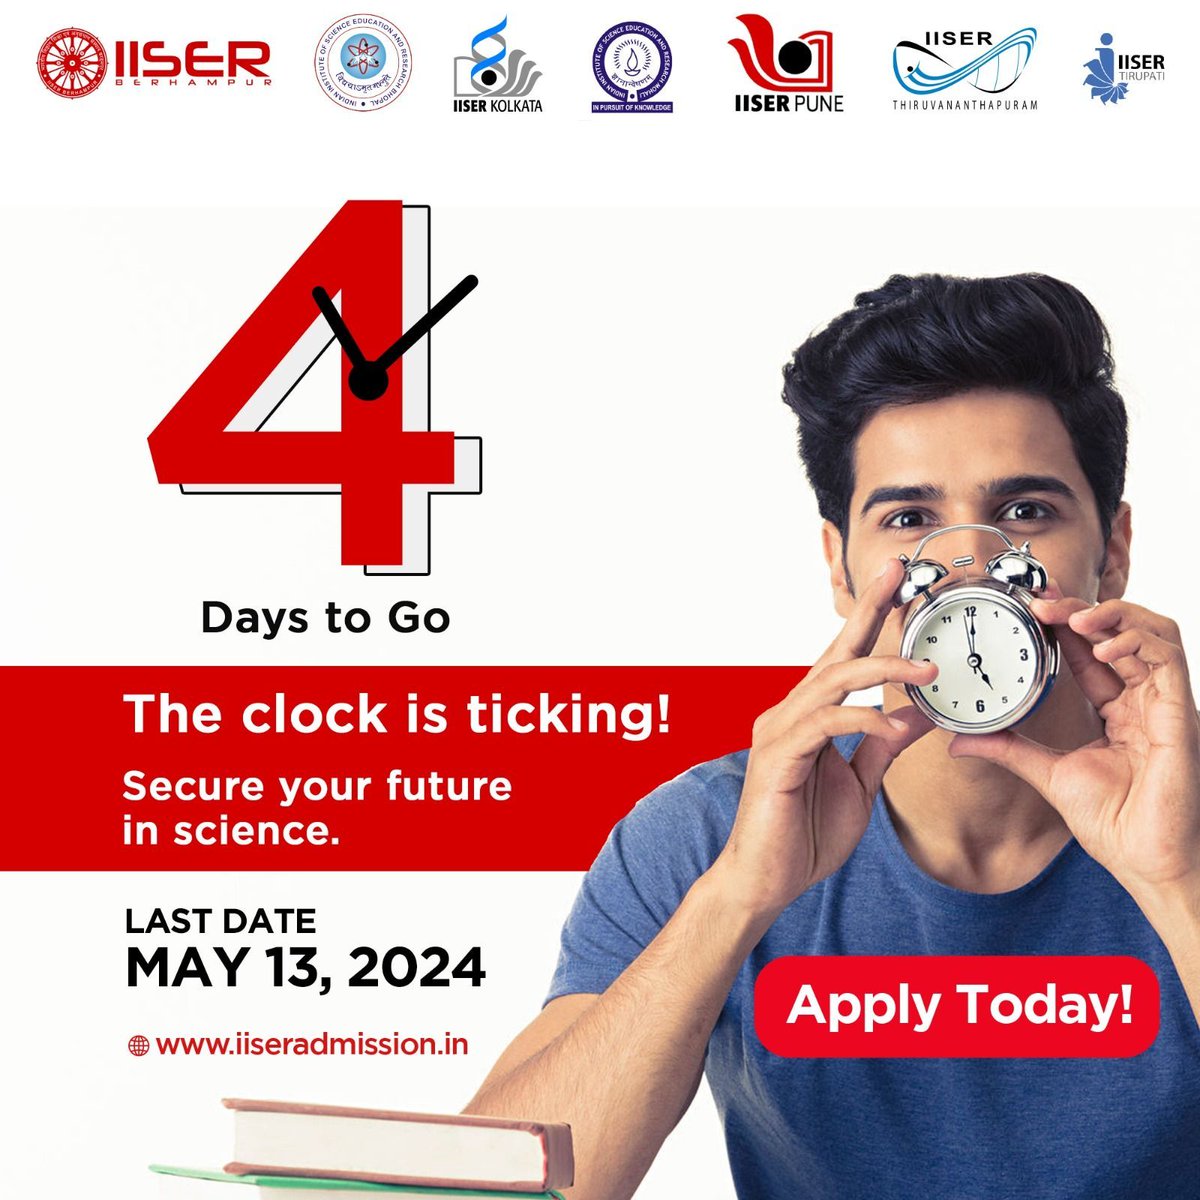 Only 4 days left to seize your opportunity.
Apply before 13th May 2024!
For more details, visit iiseradmission.in
#IISERs #AdmissionsOpen #IAT2024 #ScienceEducation #Research #BSMS #CampusLife